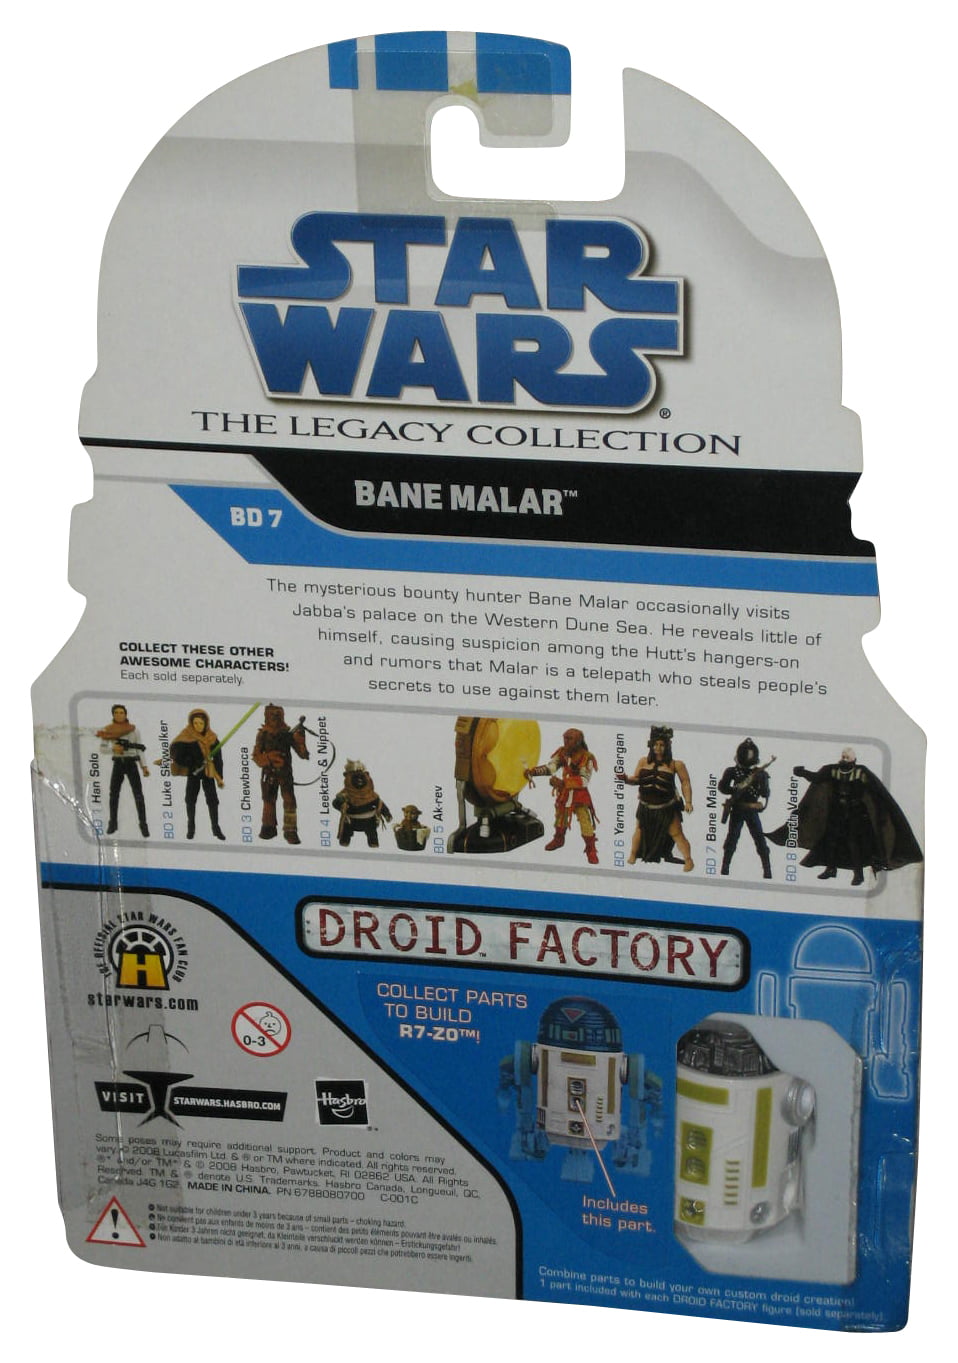 2008 Star Wars Legacy Collection Bane Malar 1st Day of Issue BD 7 for sale online 